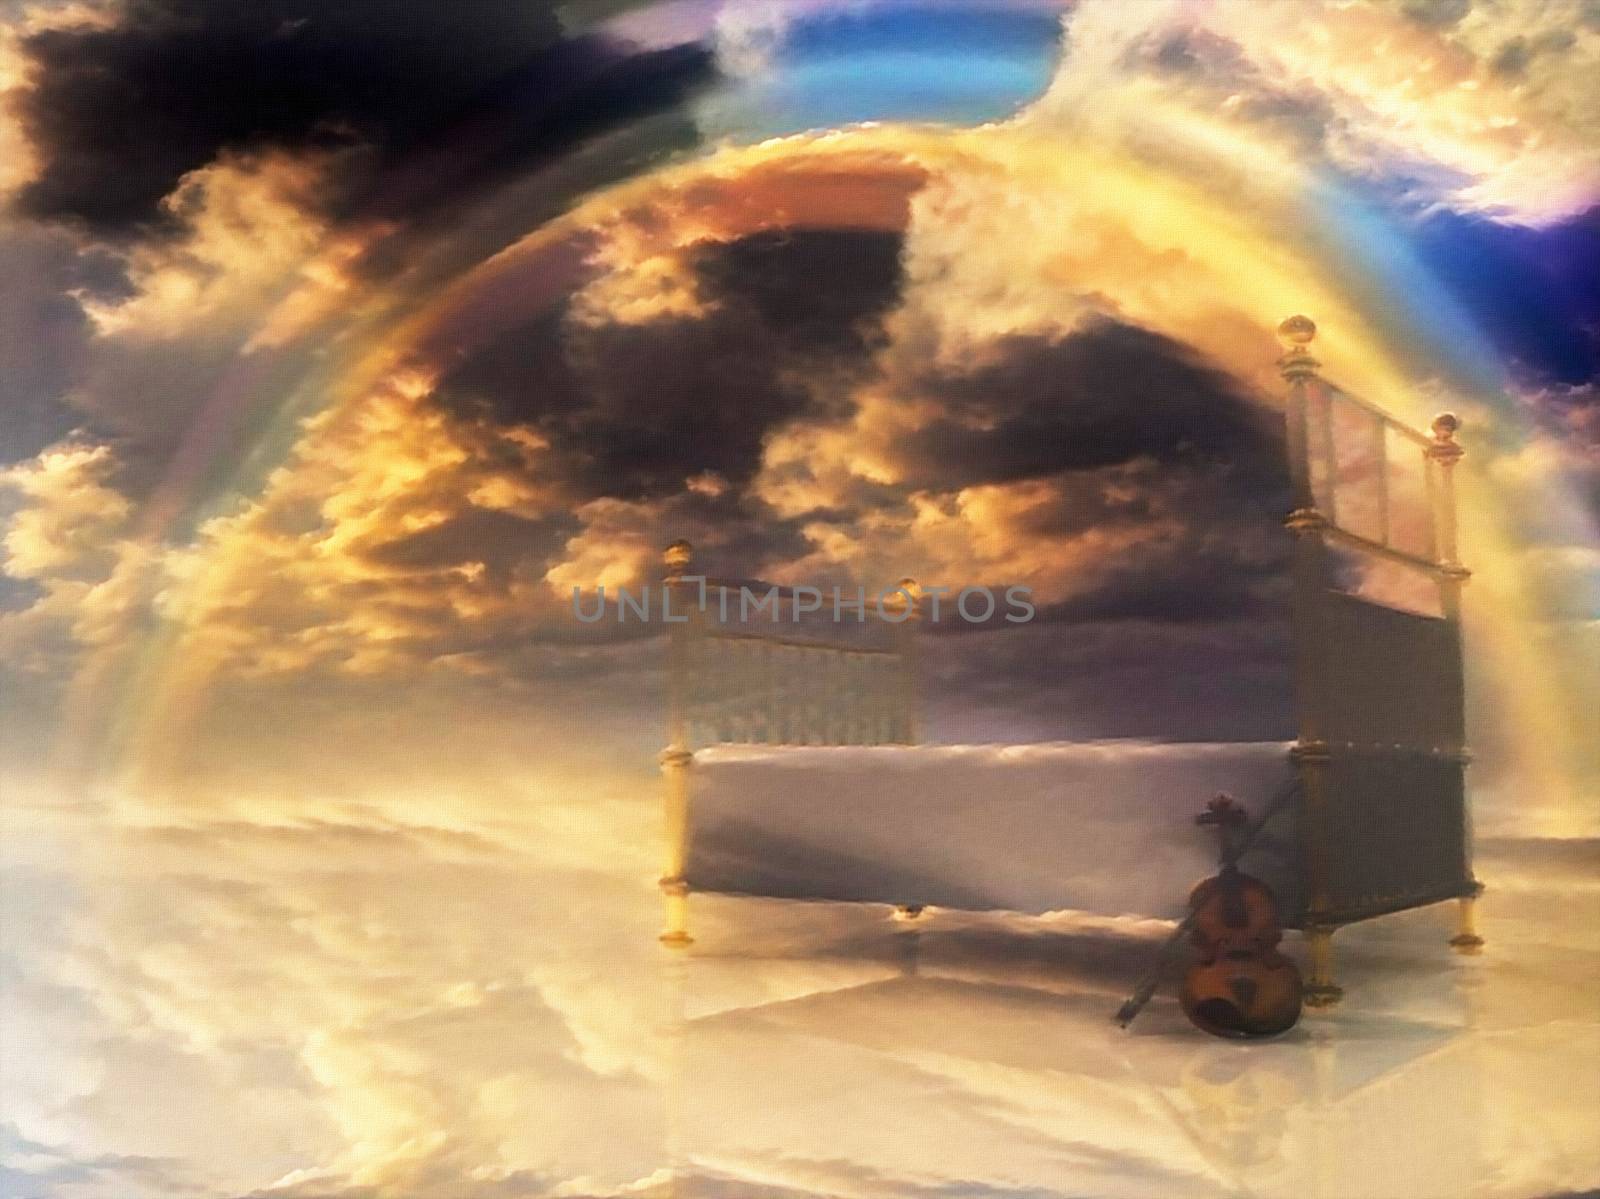 Bed with violin and rainbow in surreal scene